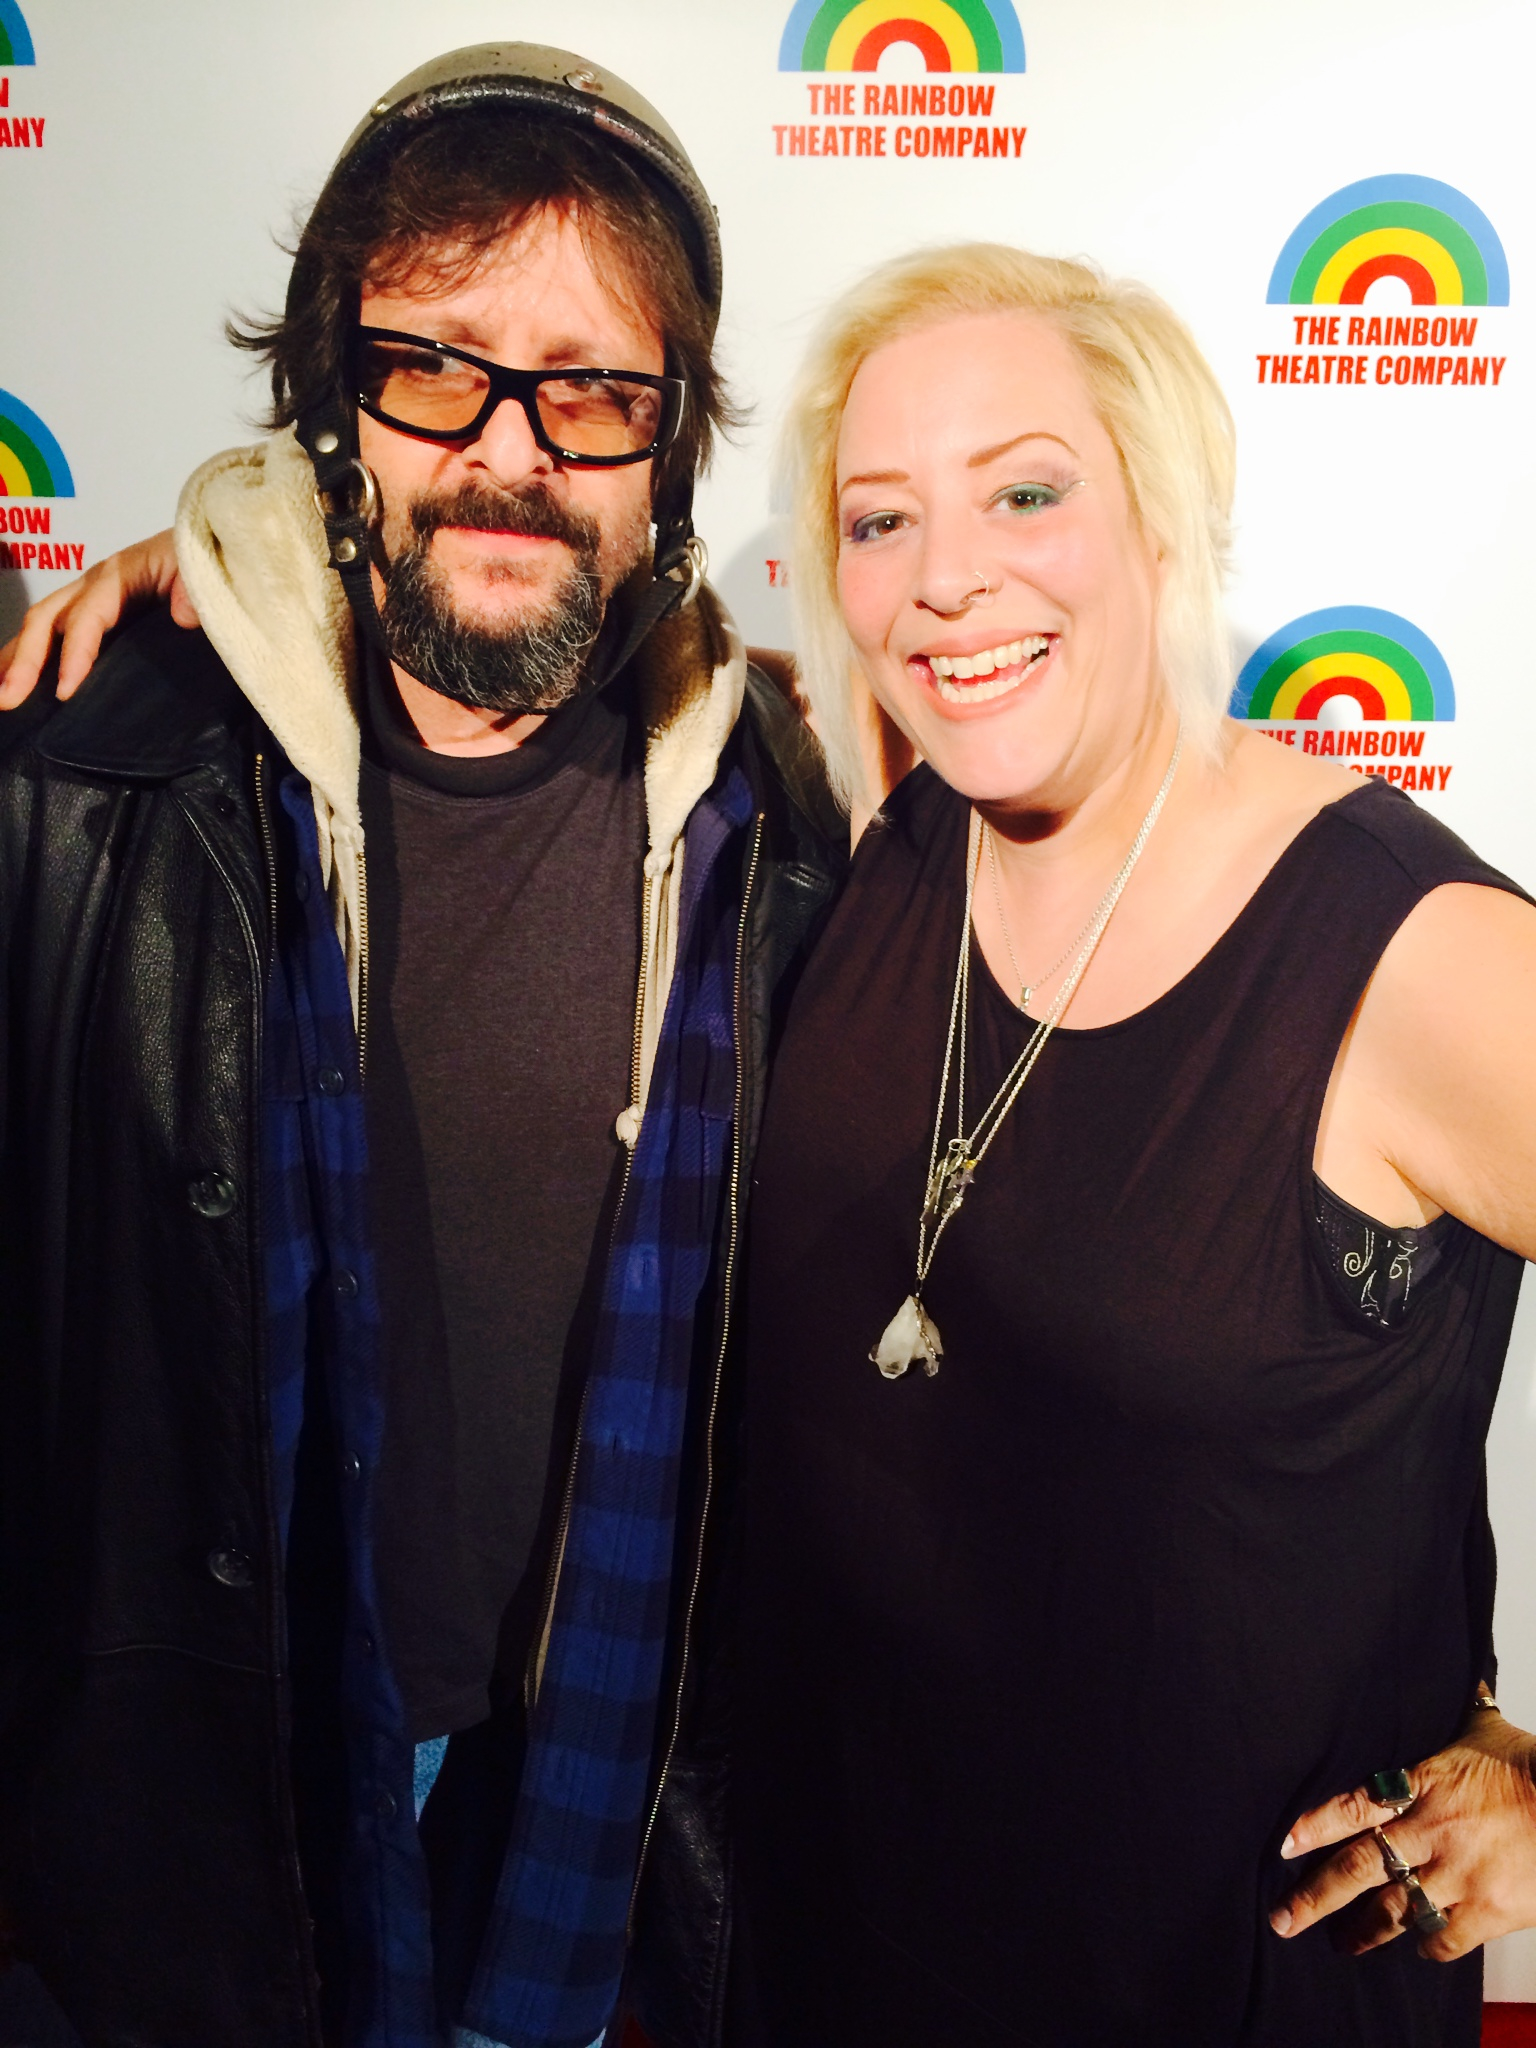 Judd Nelson and SKY Palkowitz at Edgemar Center for the Arts, November 2014